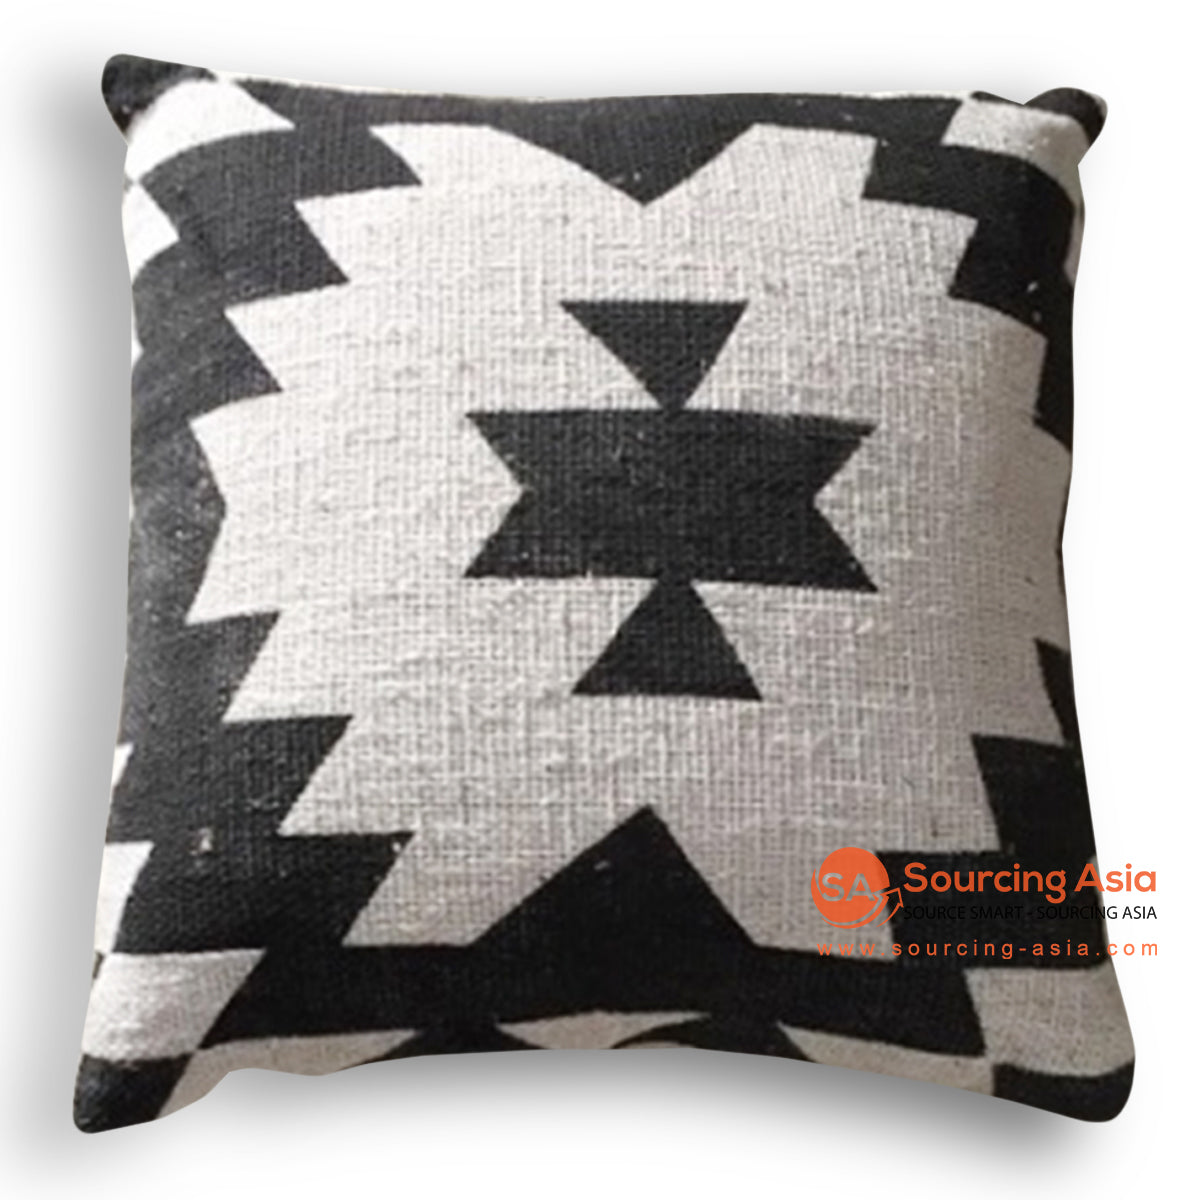 PLT015-2 BLACK AND WHITE SQUARE CUSHION (PRICE WITHOUT INNER)